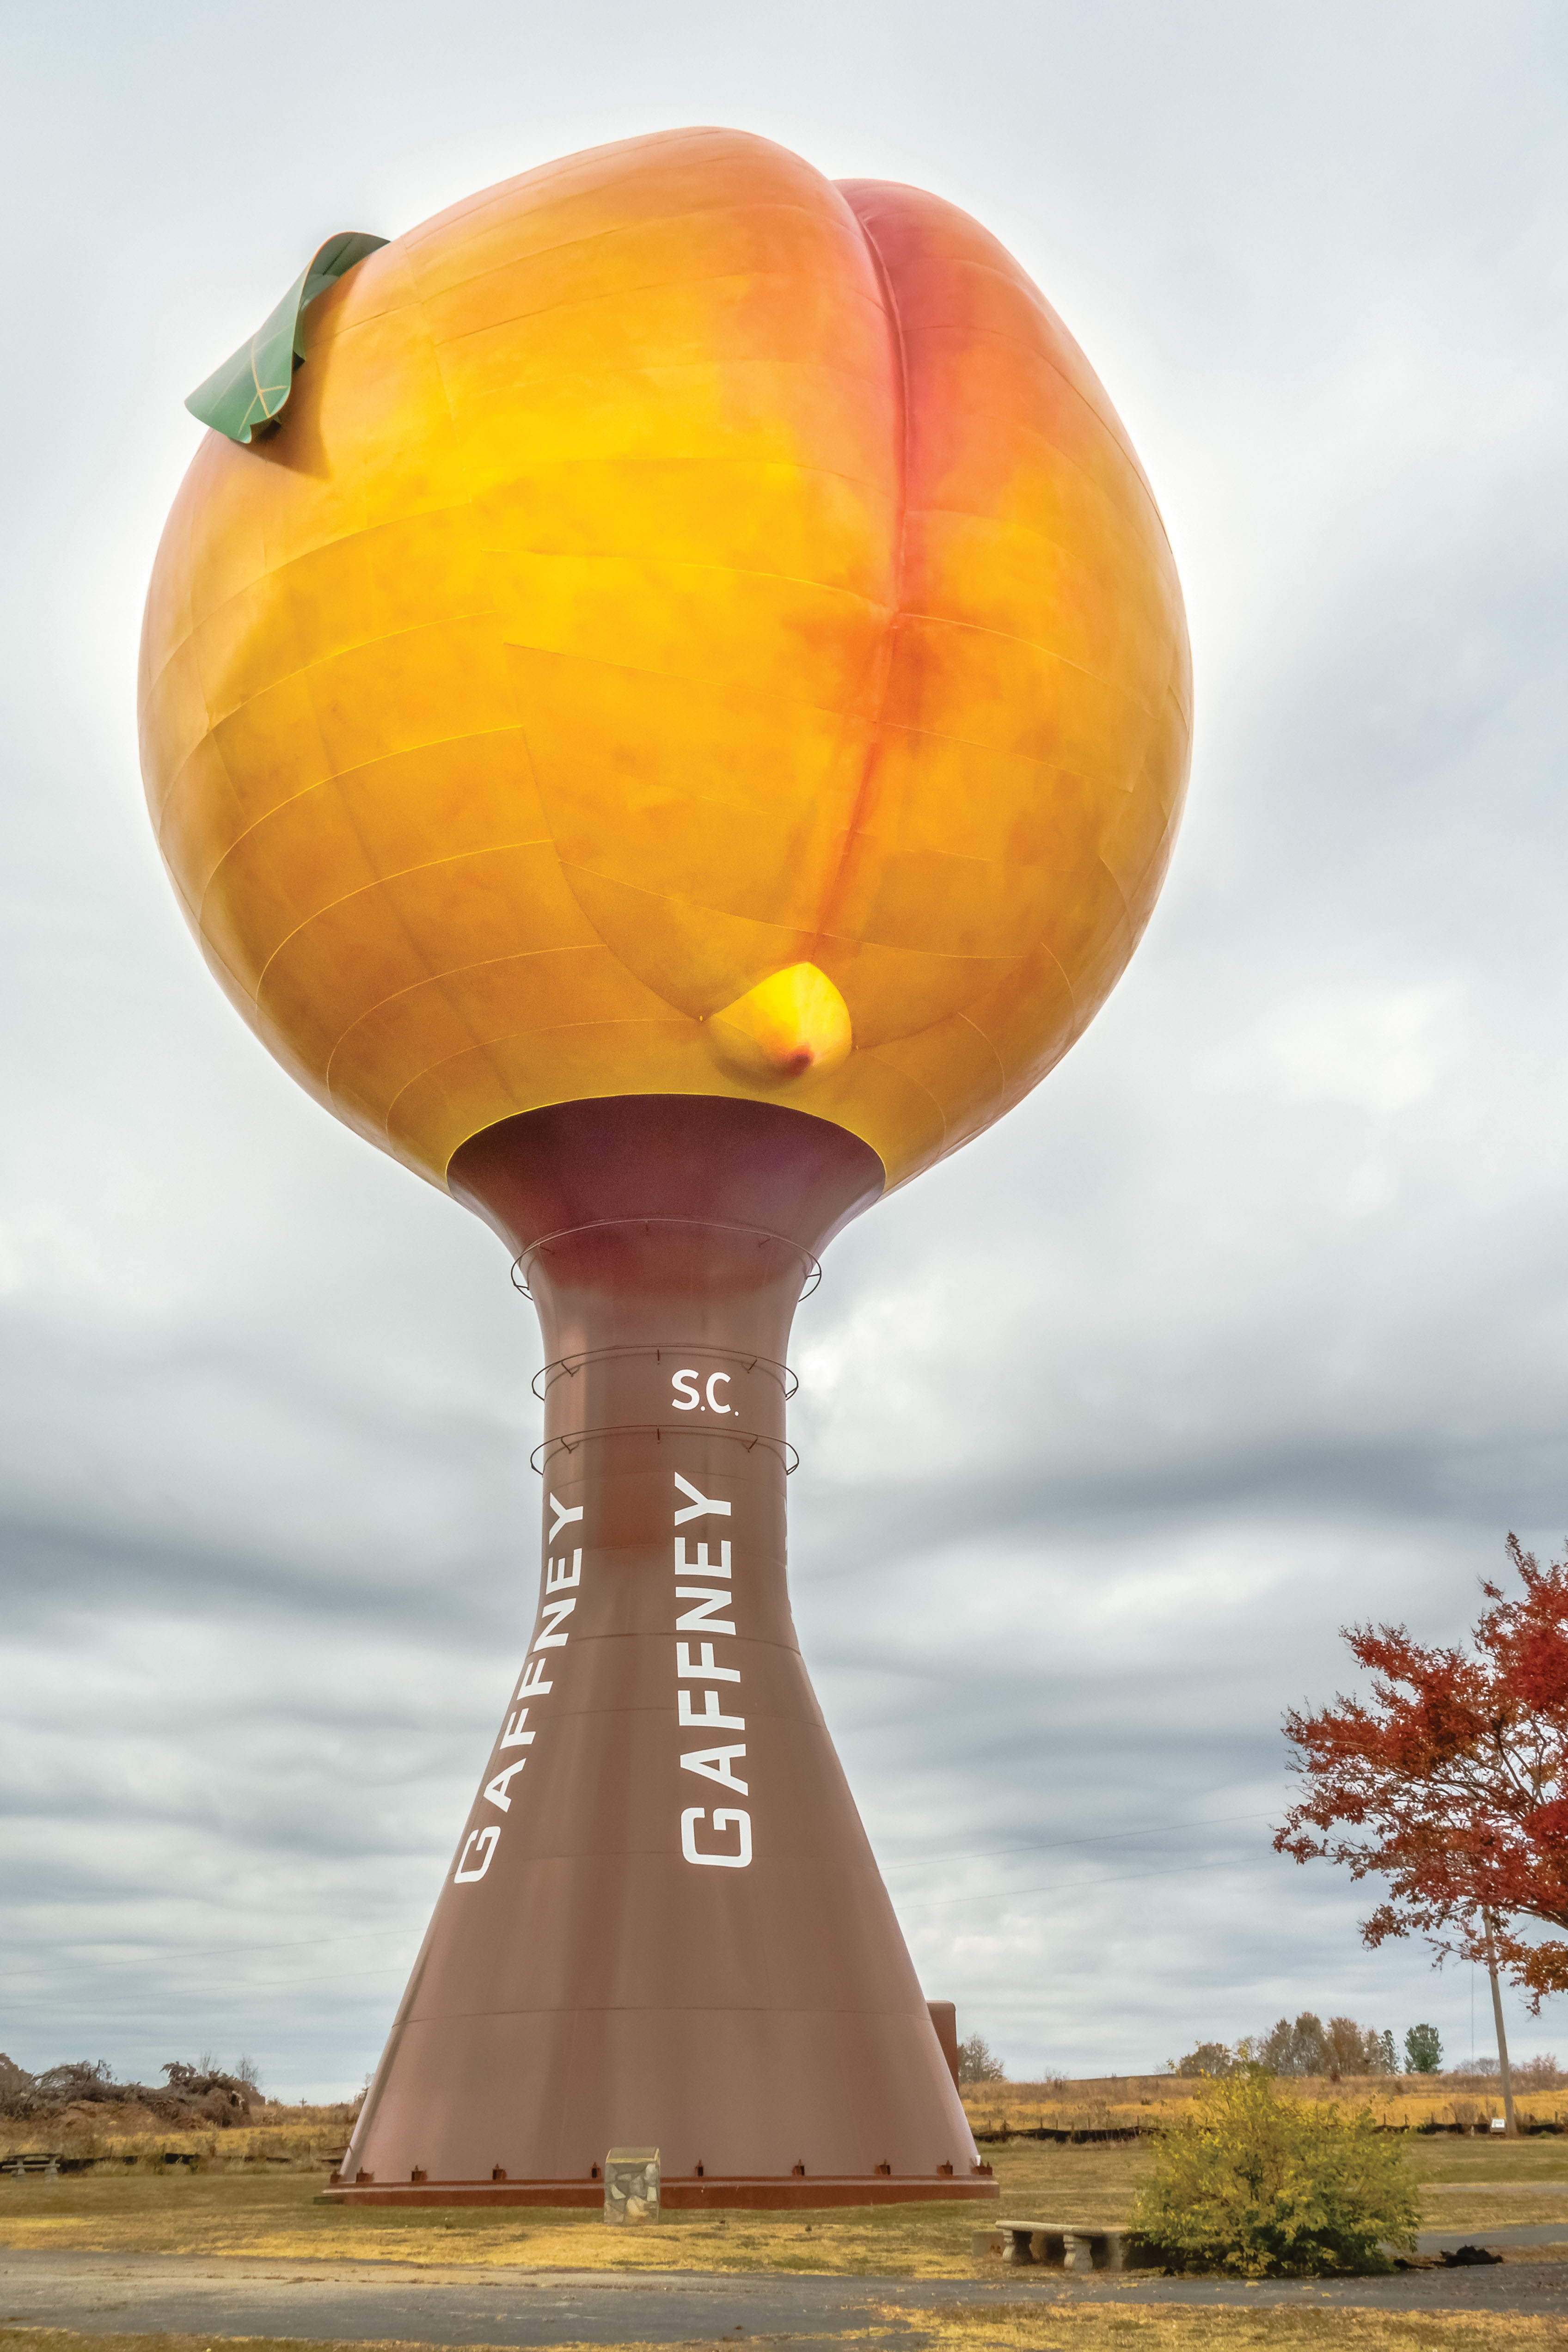 Gaffney’s Peachoid  Made famous by its star turn in the Netflix series House of Cards, this 135-foot-tall water tower along Interstate 85 in the Upstate was built in 1981 as a paean to the region’s peach farming community. Today, the area celebrates its peach bounty with a festival each July. For details, visit southcarolinapeachfest.com.